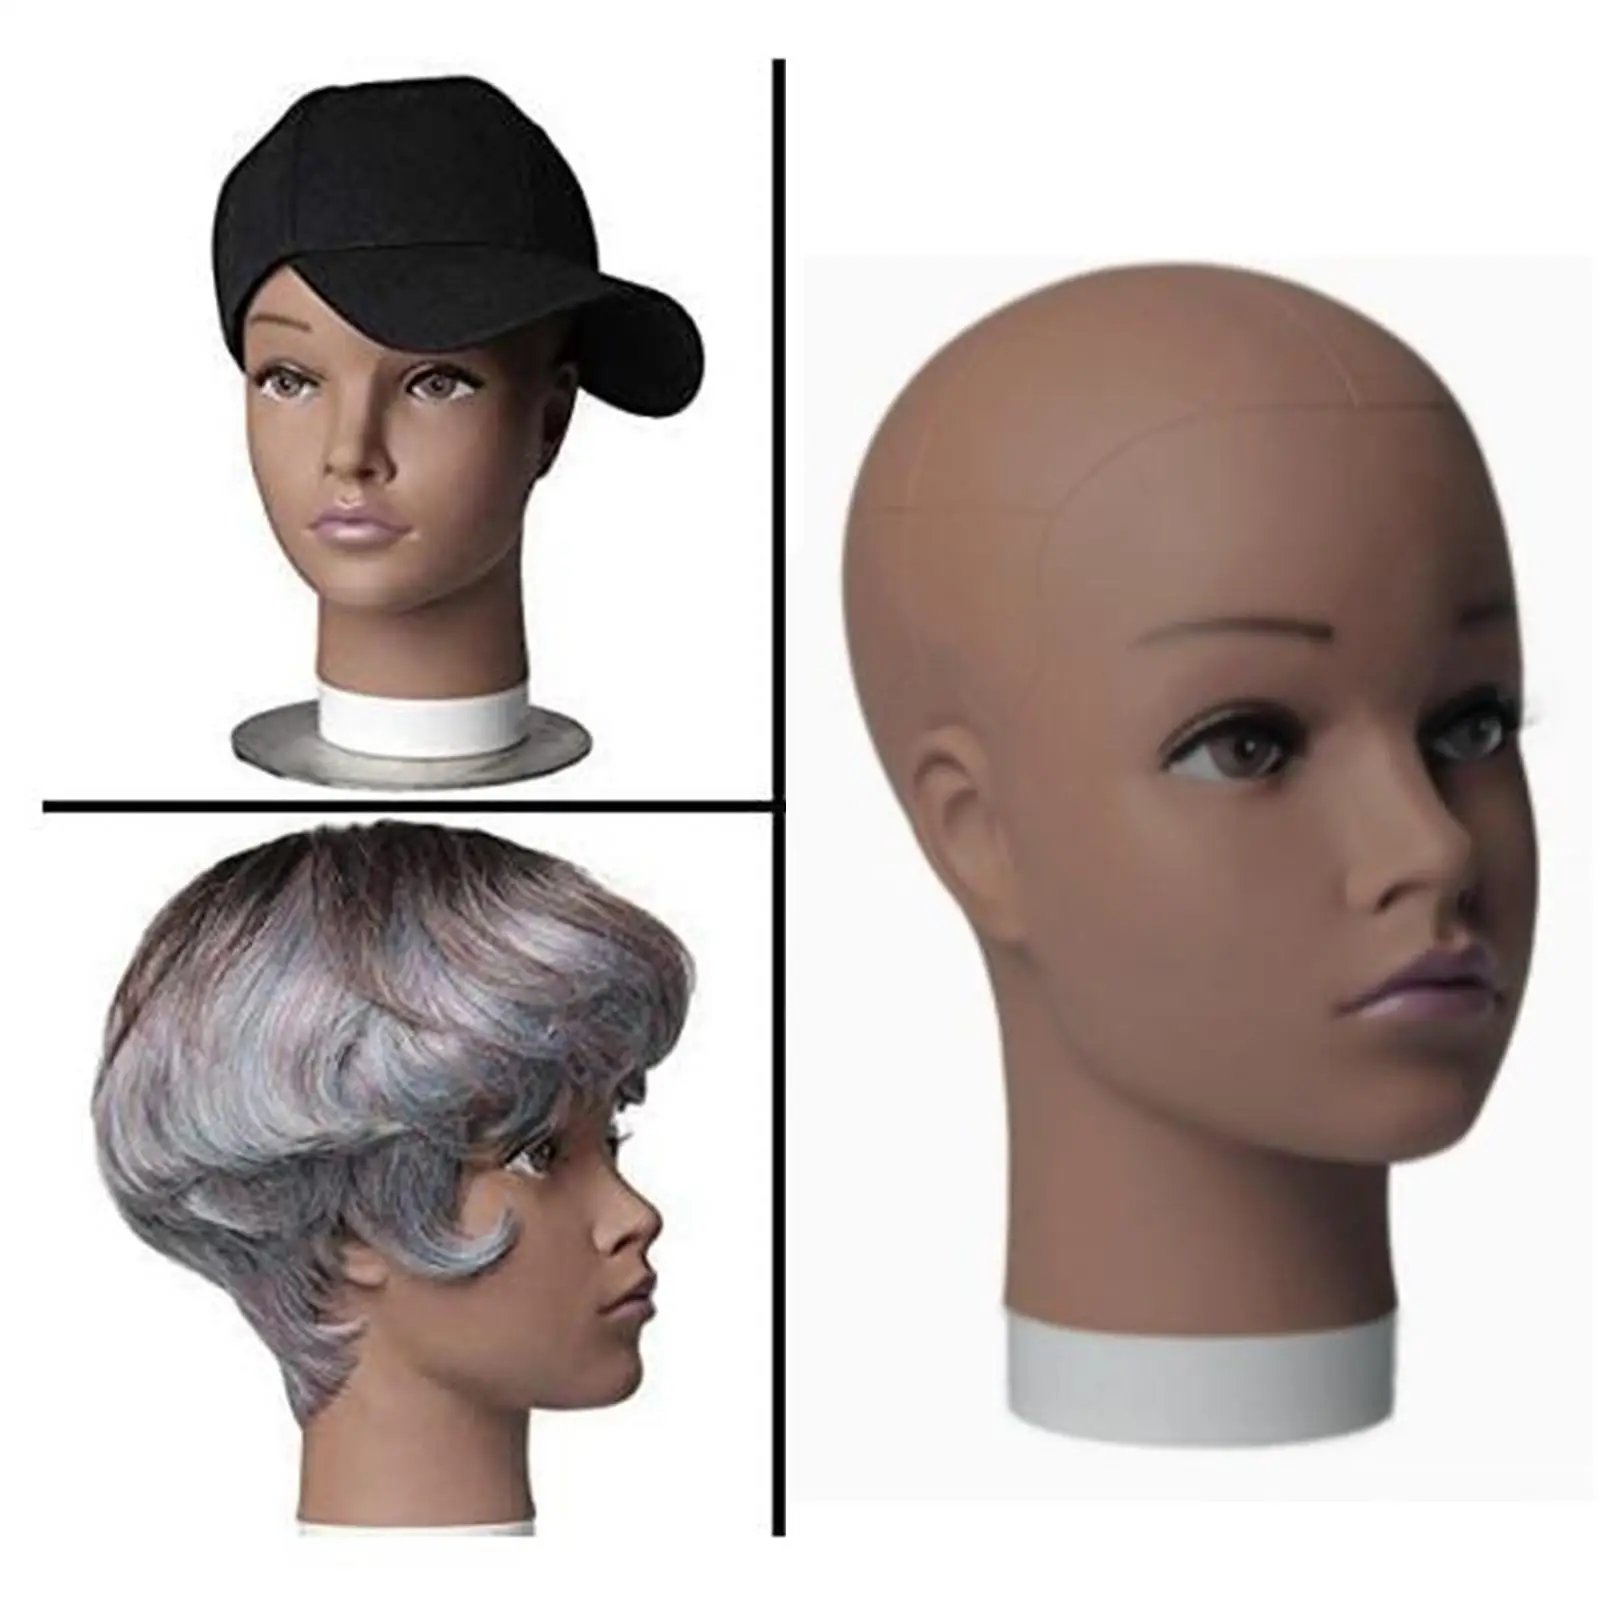  Head Model Bald Cosmetology Professional for Display Hat Making Wigs Training Scarf Headdress